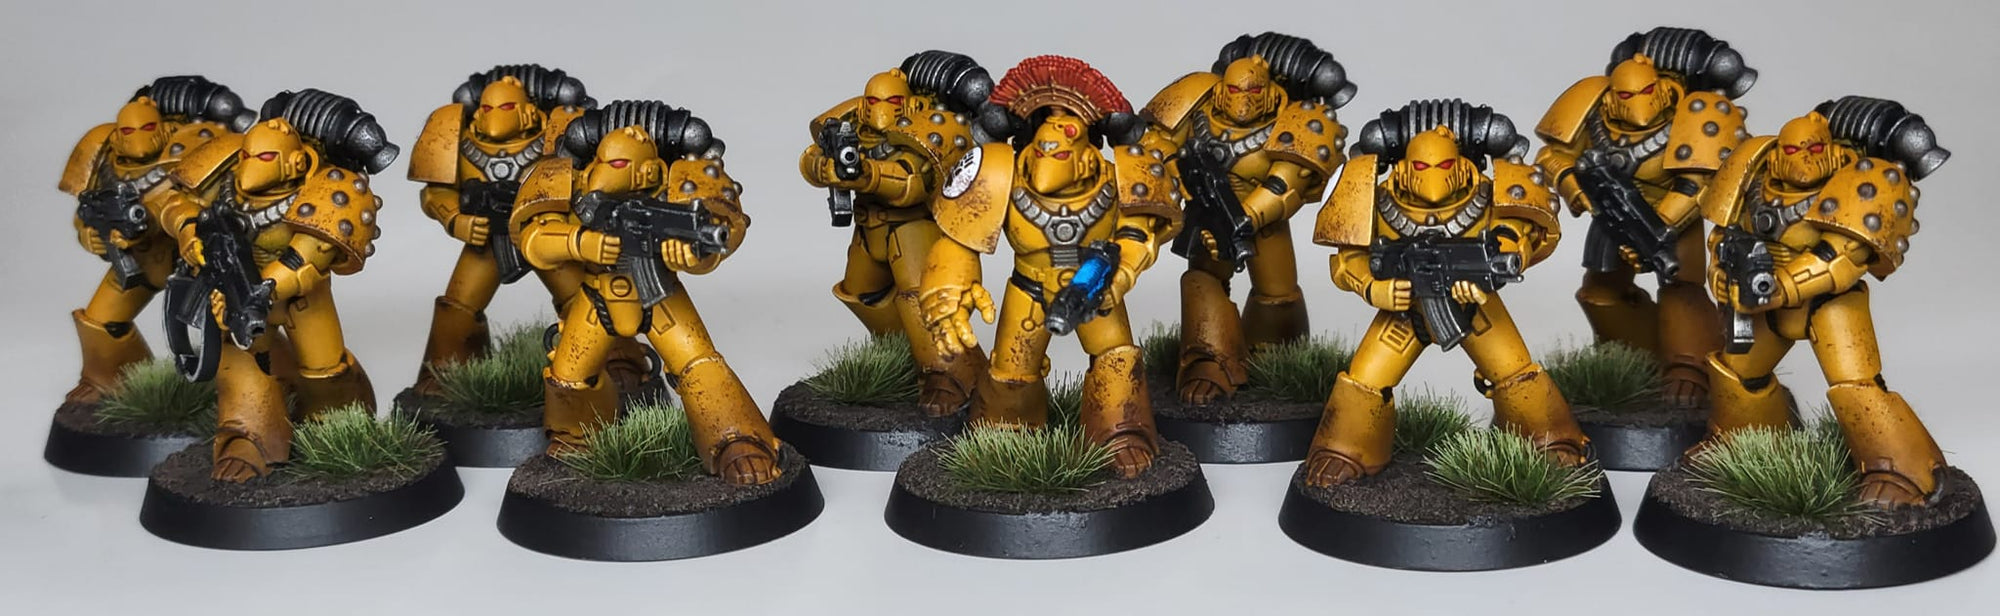 Horus Heresy Tactical Squad by @fist_and_stone